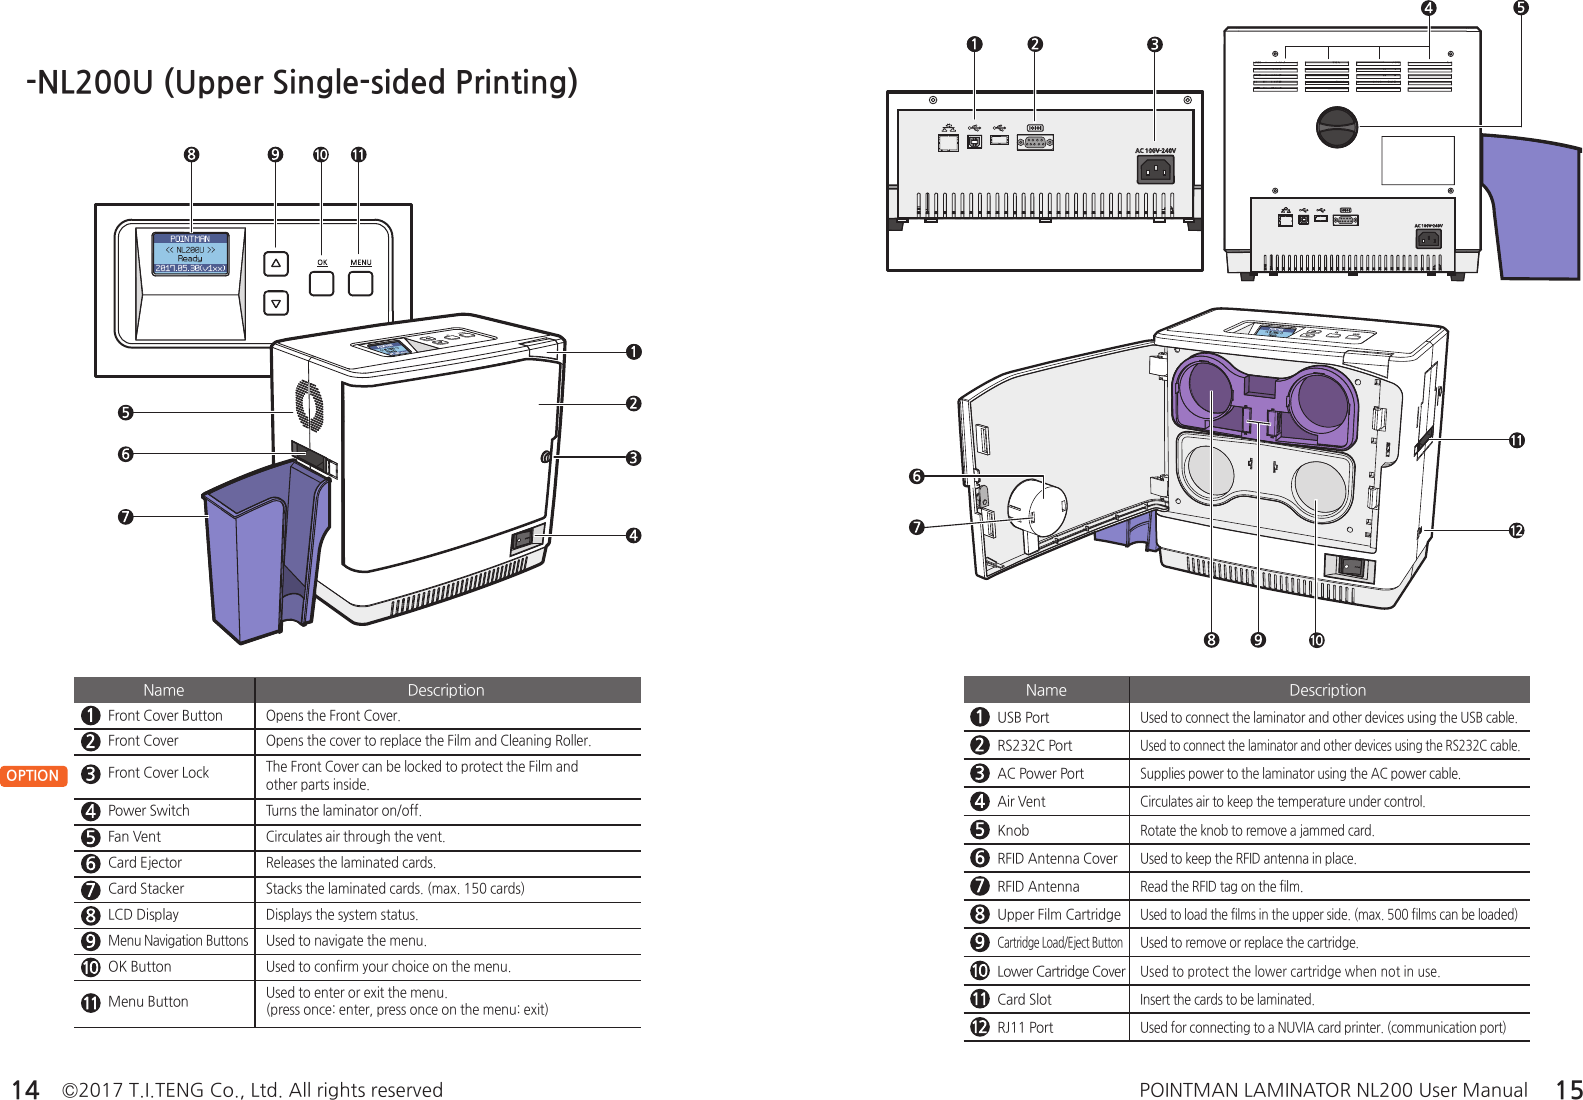 ©2017 T.I.TENG Co., Ltd. All rights reserved POINTMAN LAMINATOR NL200 User Manual14 15OPTION Front Cover ButtonOpens the Front Cover.Front CoverOpens the cover to replace the Film and Cleaning Roller.Front Cover LockThe Front Cover can be locked to protect the Film and other parts inside.Power SwitchTurns the laminator on/off.Fan VentCirculates air through the vent.Card EjectorReleases the laminated cards.Card StackerStacks the laminated cards. (max. 150 cards)LCD DisplayDisplays the system status.Menu Navigation ButtonsUsed to navigate the menu.OK ButtonUsed to confirm your choice on the menu.Menu ButtonUsed to enter or exit the menu. (press once: enter, press once on the menu: exit)Name Description-NL200U (Upper Single-sided Printing)USB PortUsed to connect the laminator and other devices using the USB cable.RS232C PortUsed to connect the laminator and other devices using the RS232C cable.AC Power PortSupplies power to the laminator using the AC power cable.Air VentCirculates air to keep the temperature under control.KnobRotate the knob to remove a jammed card.RFID Antenna CoverUsed to keep the RFID antenna in place.RFID AntennaRead the RFID tag on the film.Upper Film CartridgeUsed to load the films in the upper side. (max. 500 films can be loaded)Cartridge Load/Eject ButtonUsed to remove or replace the cartridge.Lower Cartridge CoverUsed to protect the lower cartridge when not in use.Card SlotInsert the cards to be laminated.RJ11 PortUsed for connecting to a NUVIA card printer. (communication port)Name Description